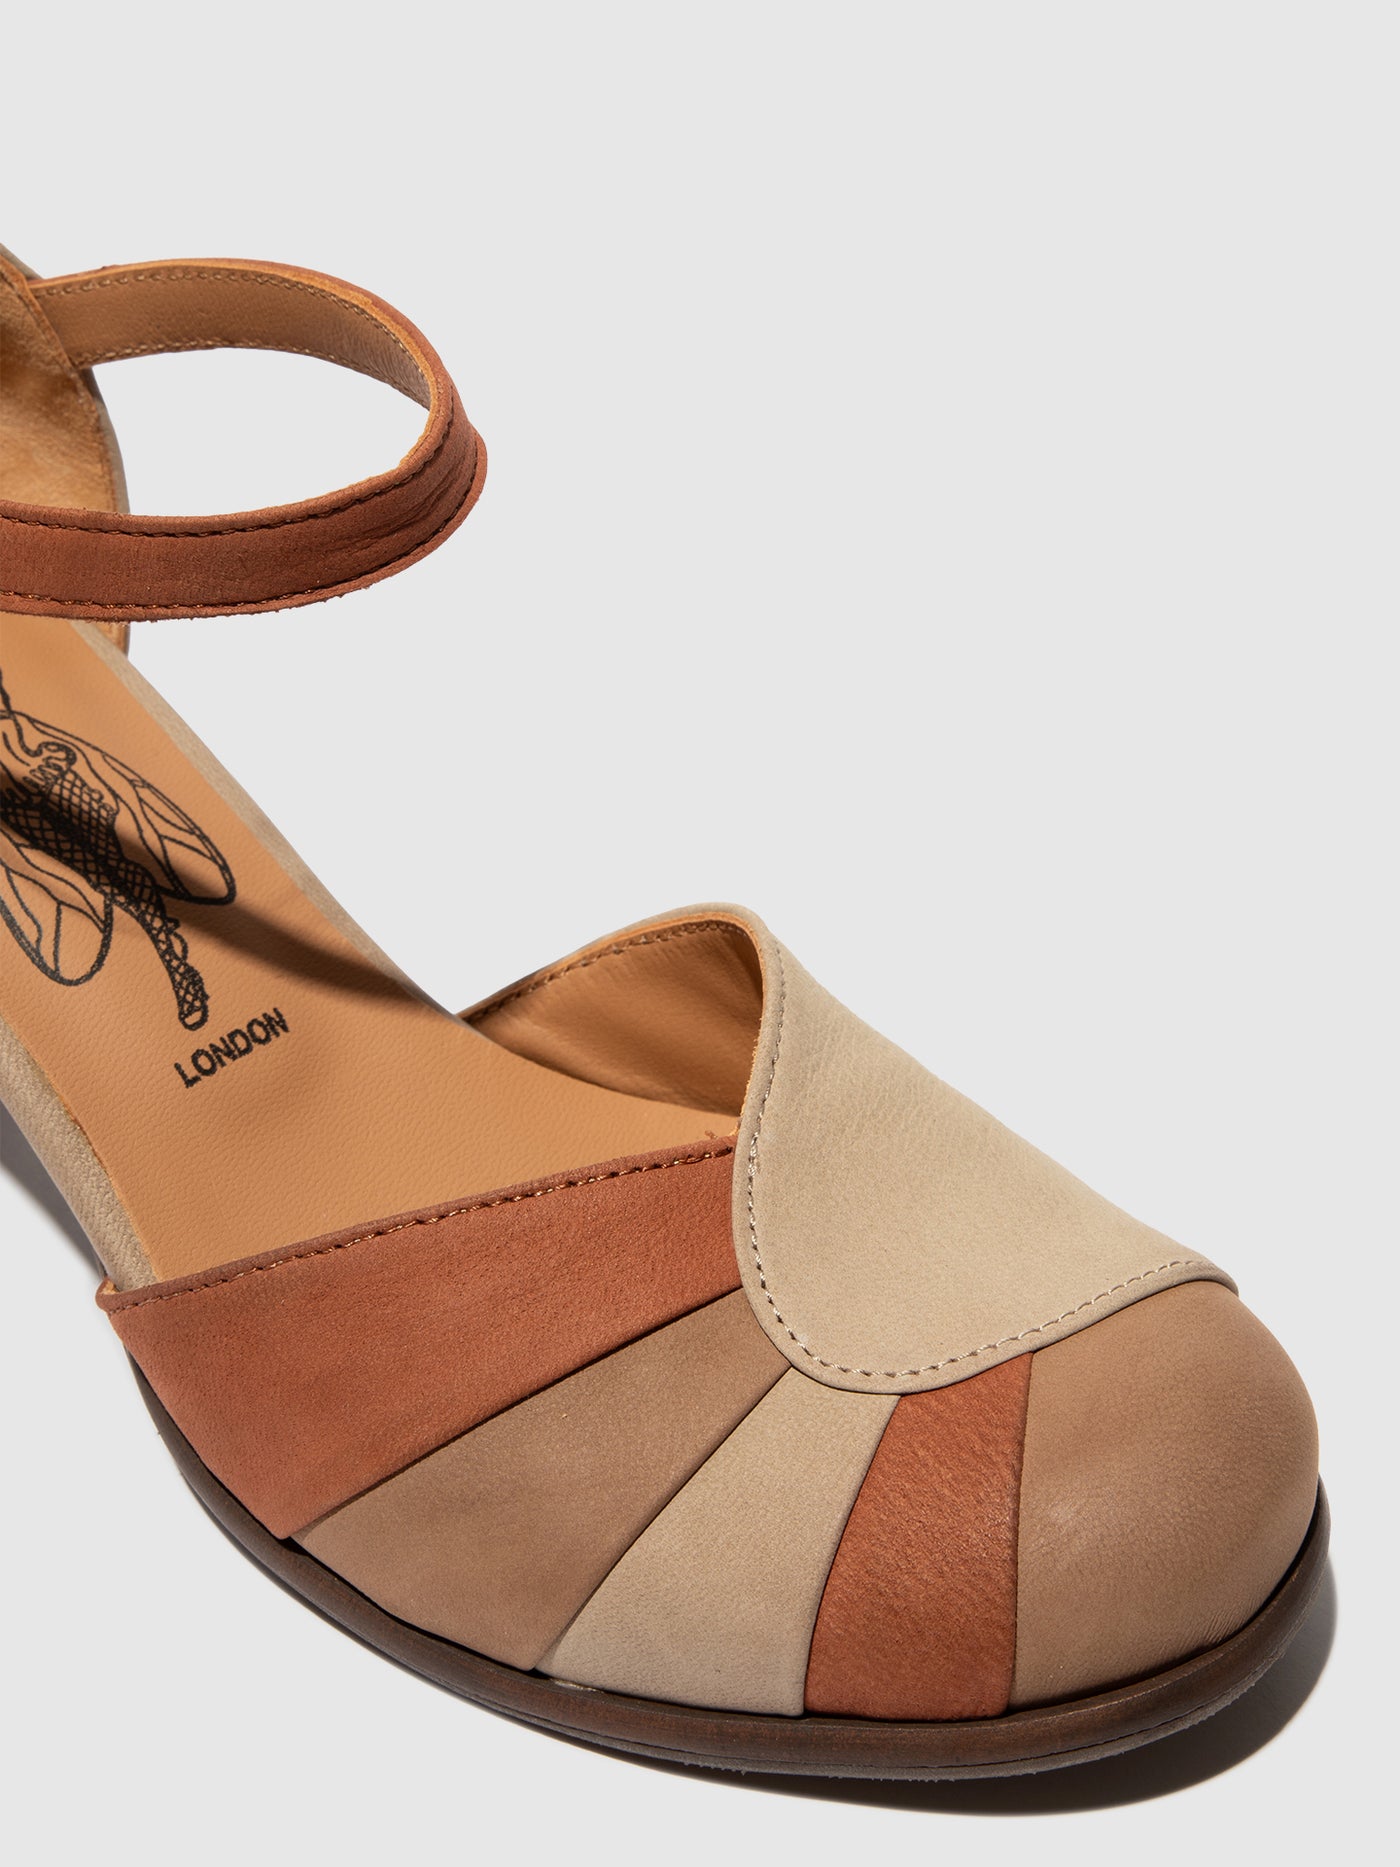 Heel Shoes BESH087FLY BEIGE/TAUPE/TAN